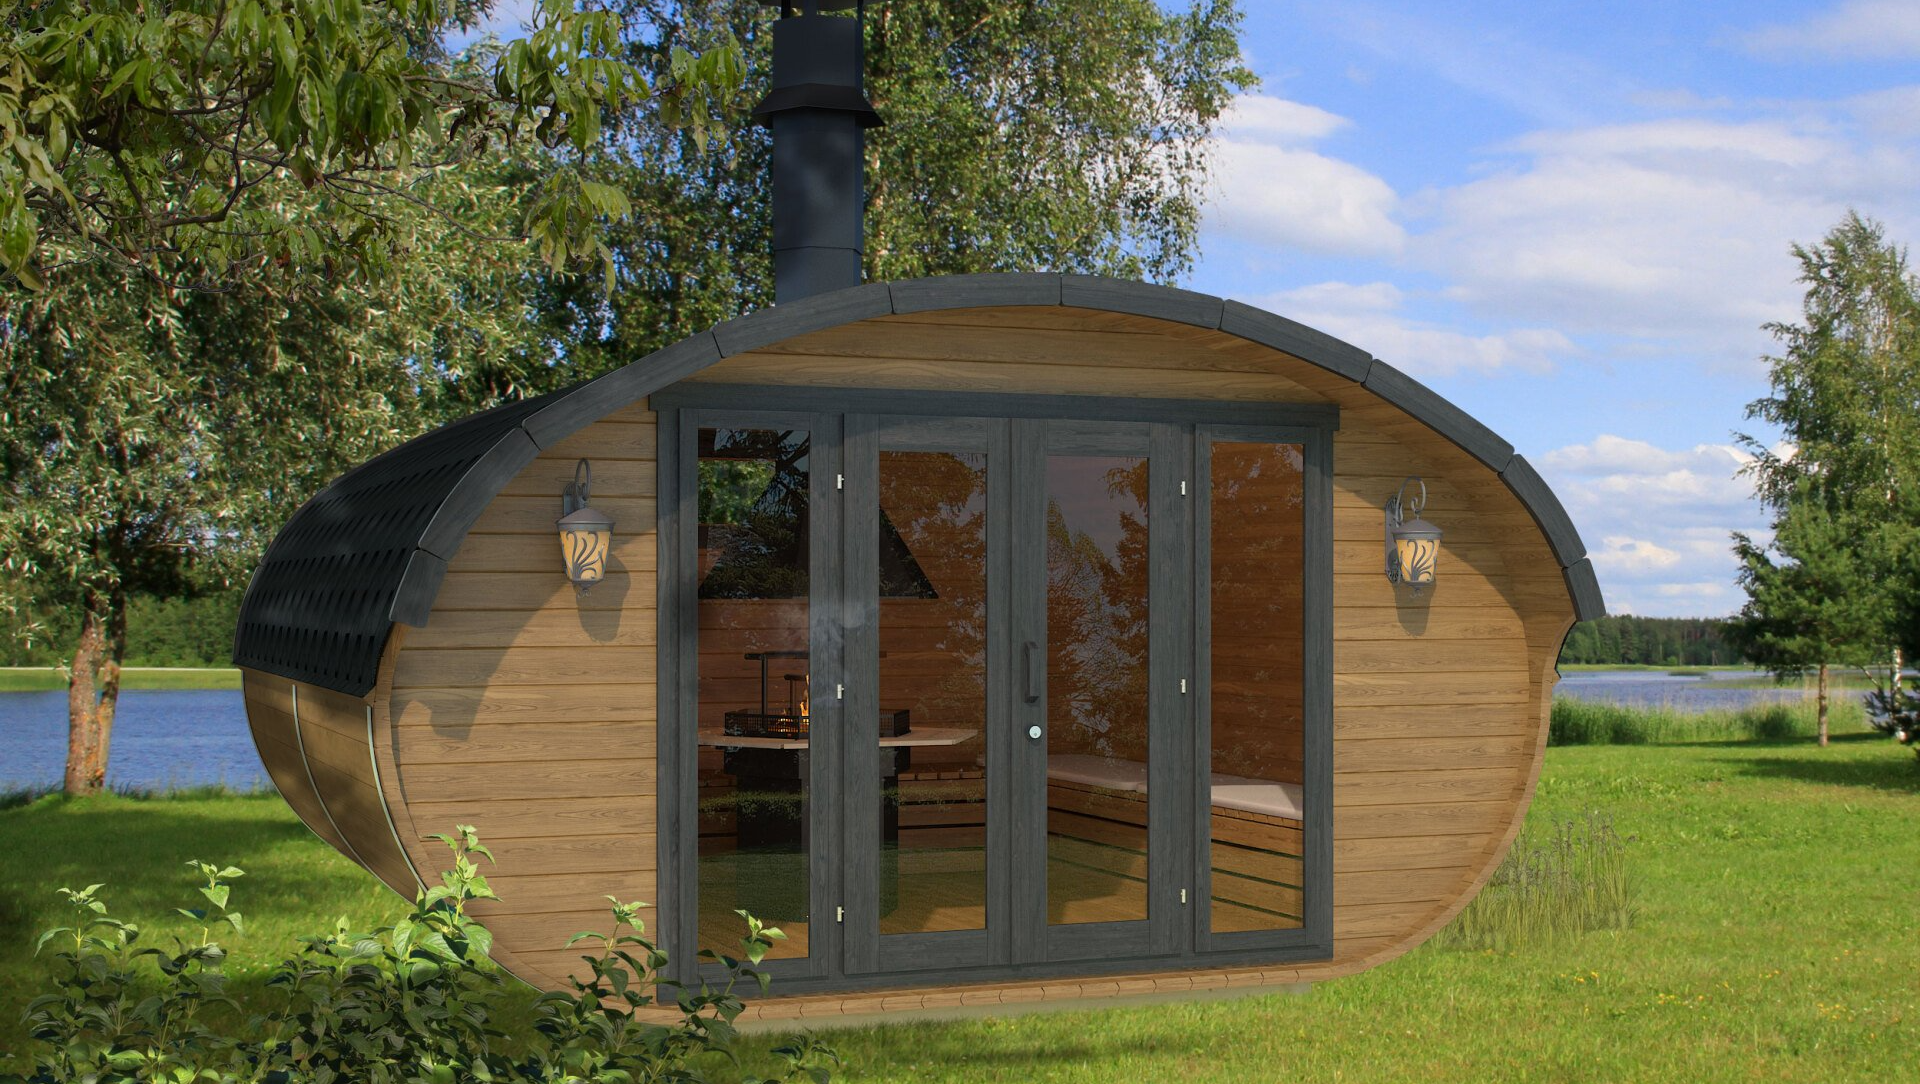 Glamping Pods For Sale Near Me